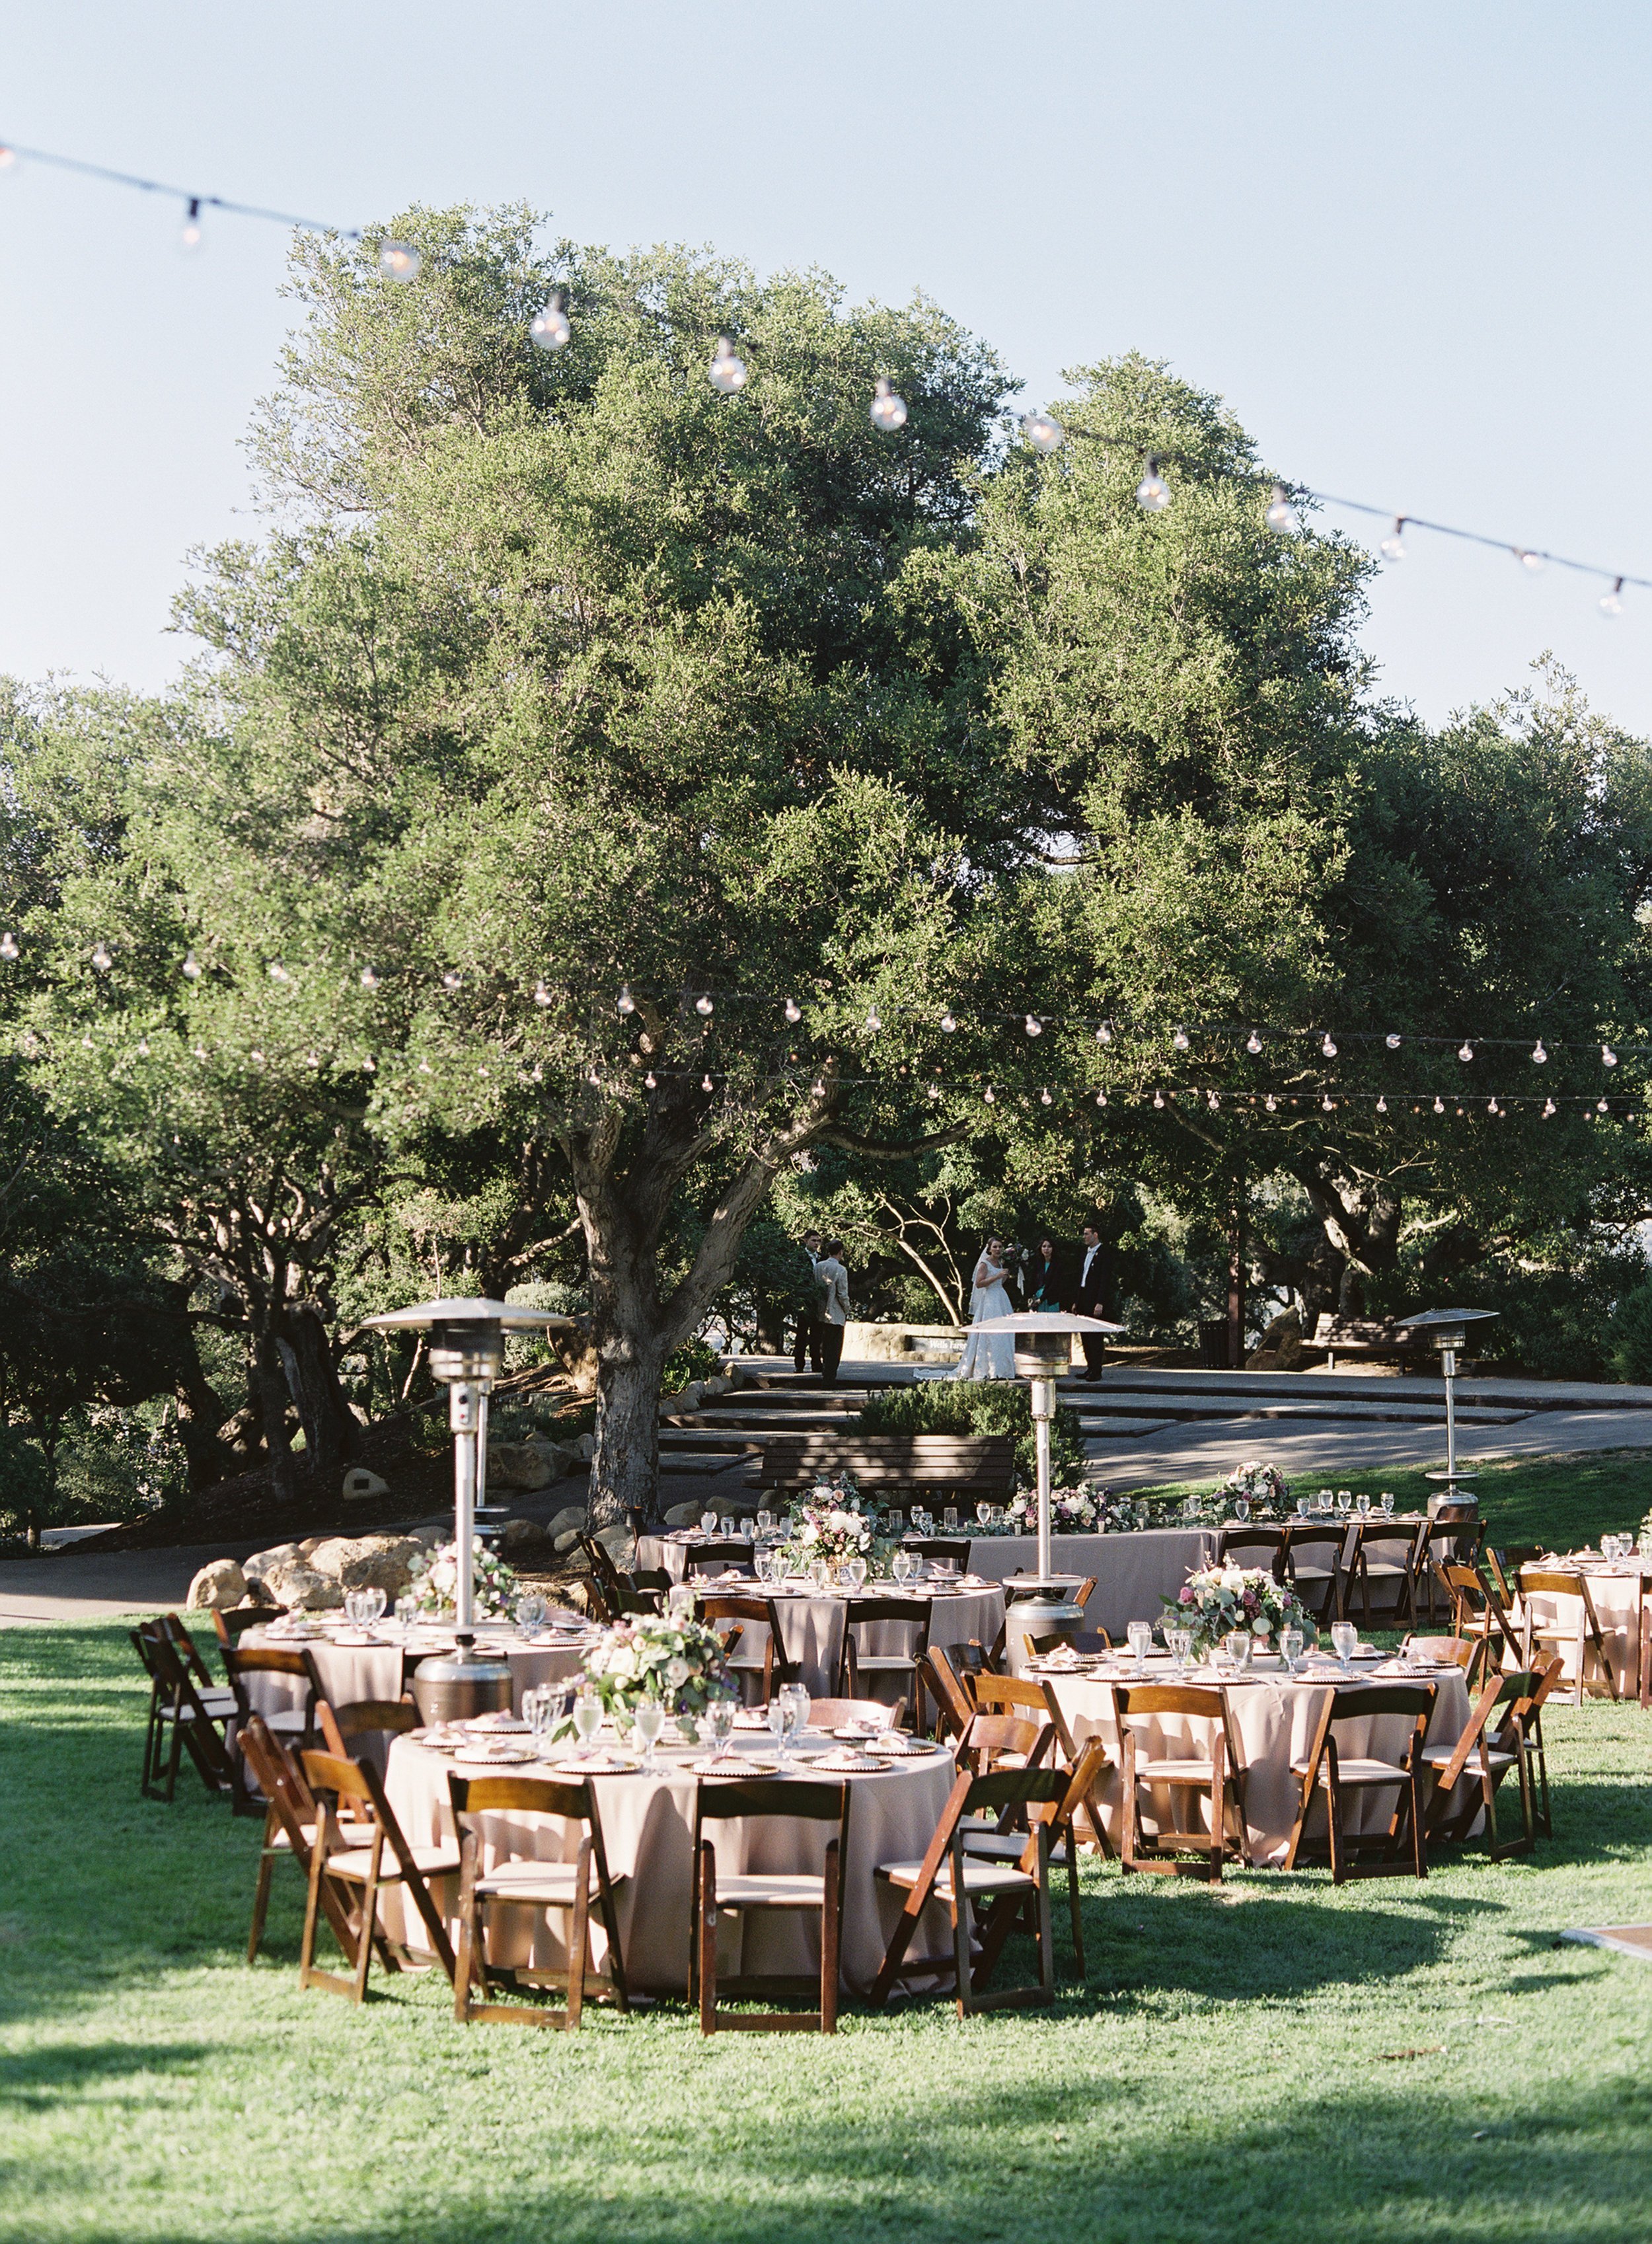 www.santabarbarawedding.com | Elings Park | Sara Weir Photography | Reception Tables Set Up in the Park